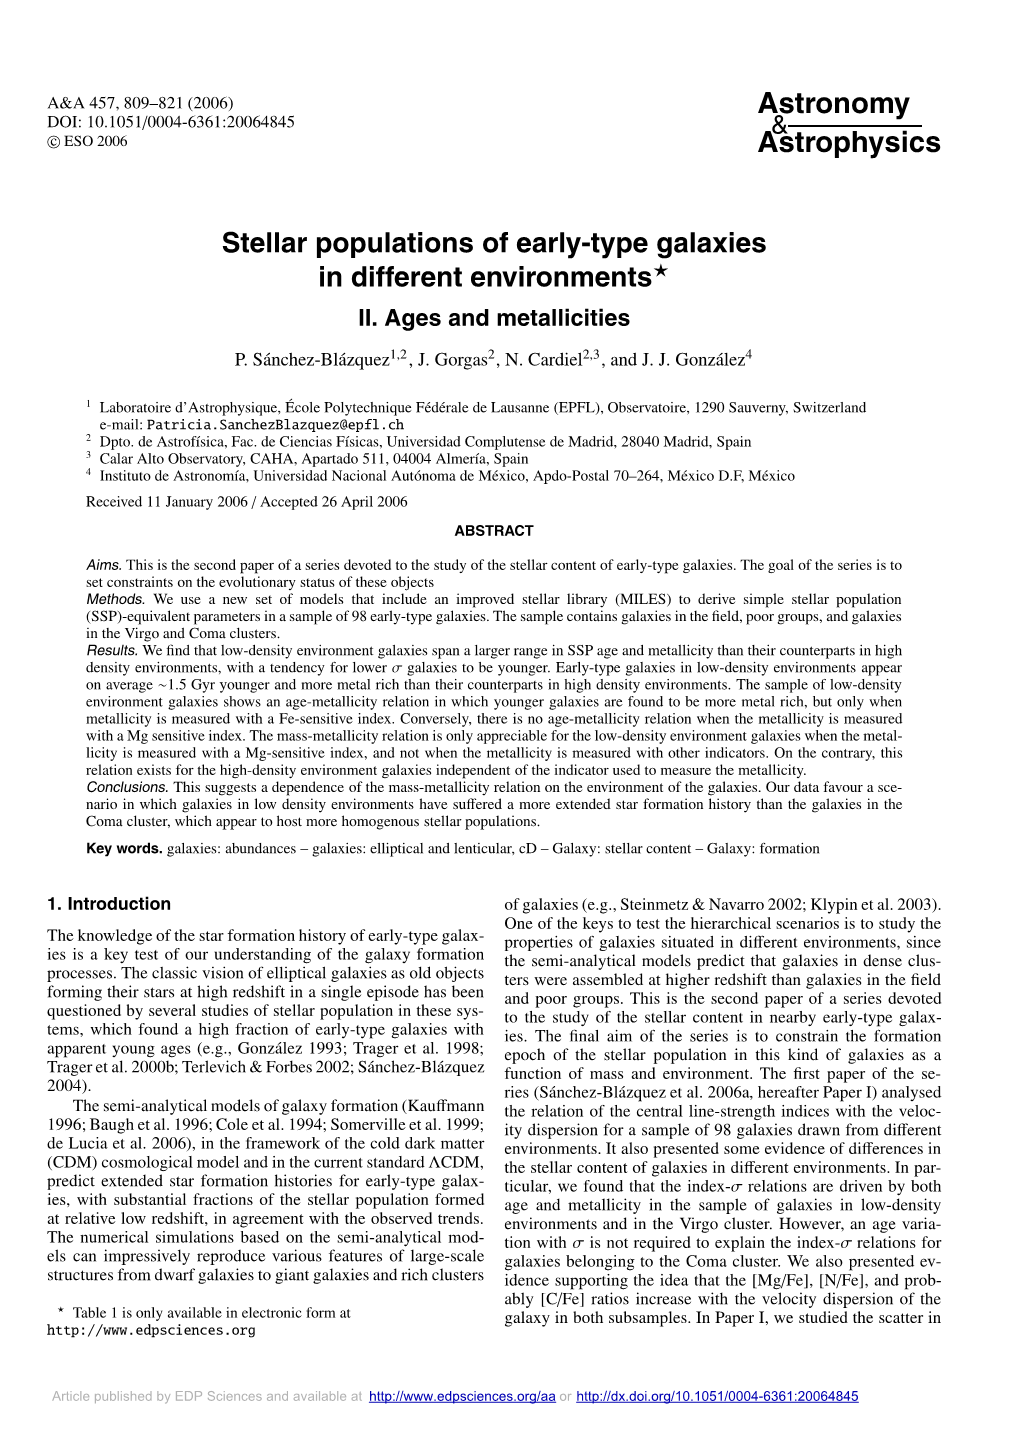 Stellar Populations of Early-Type Galaxies in Different Environments� II